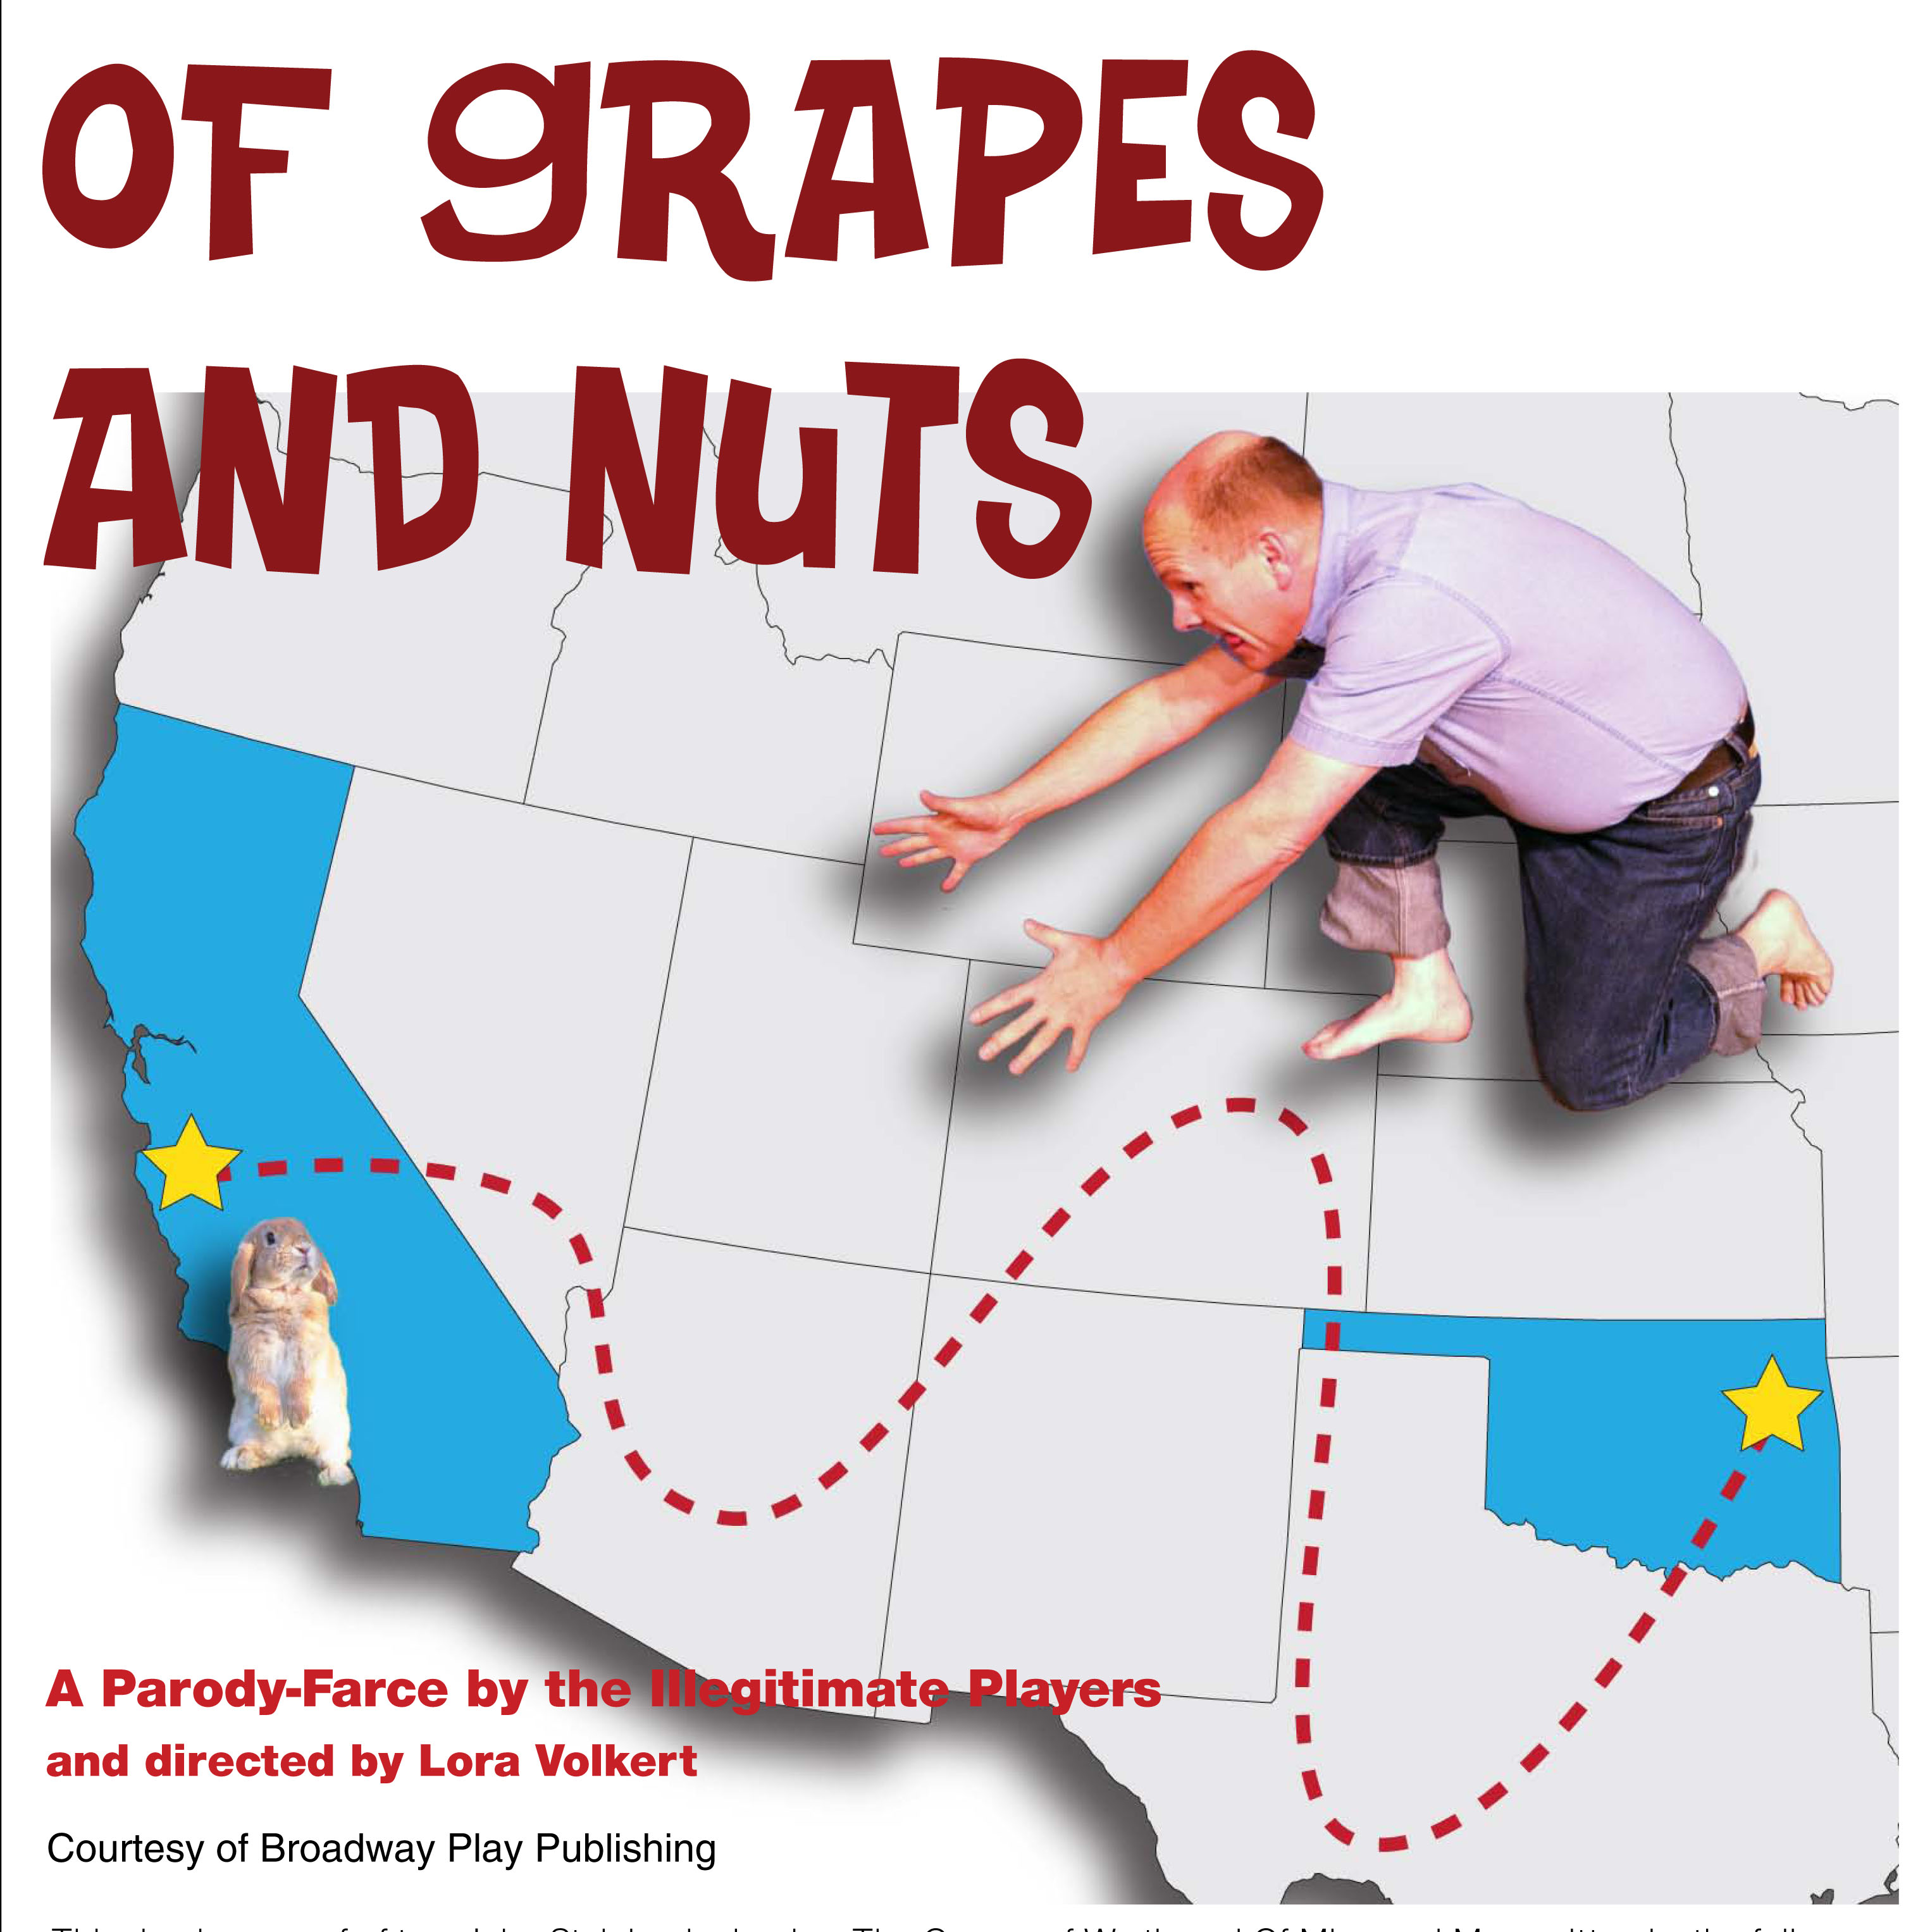 Of Grapes and Nuts